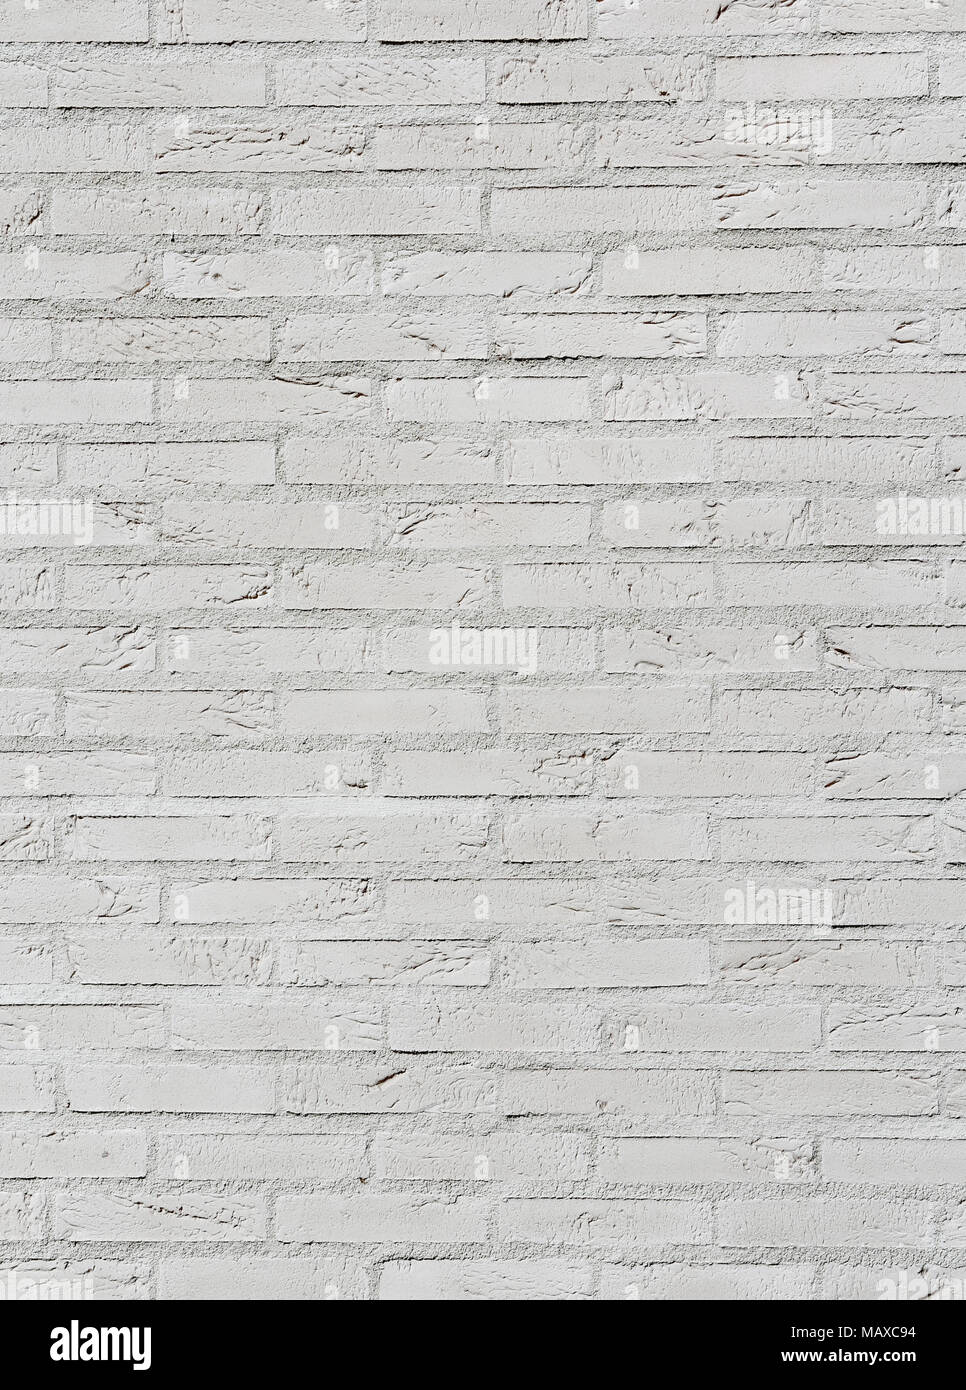 Clean white brick wall with beautiful texture and a lot of horizontal lines of cement. Stock Photo